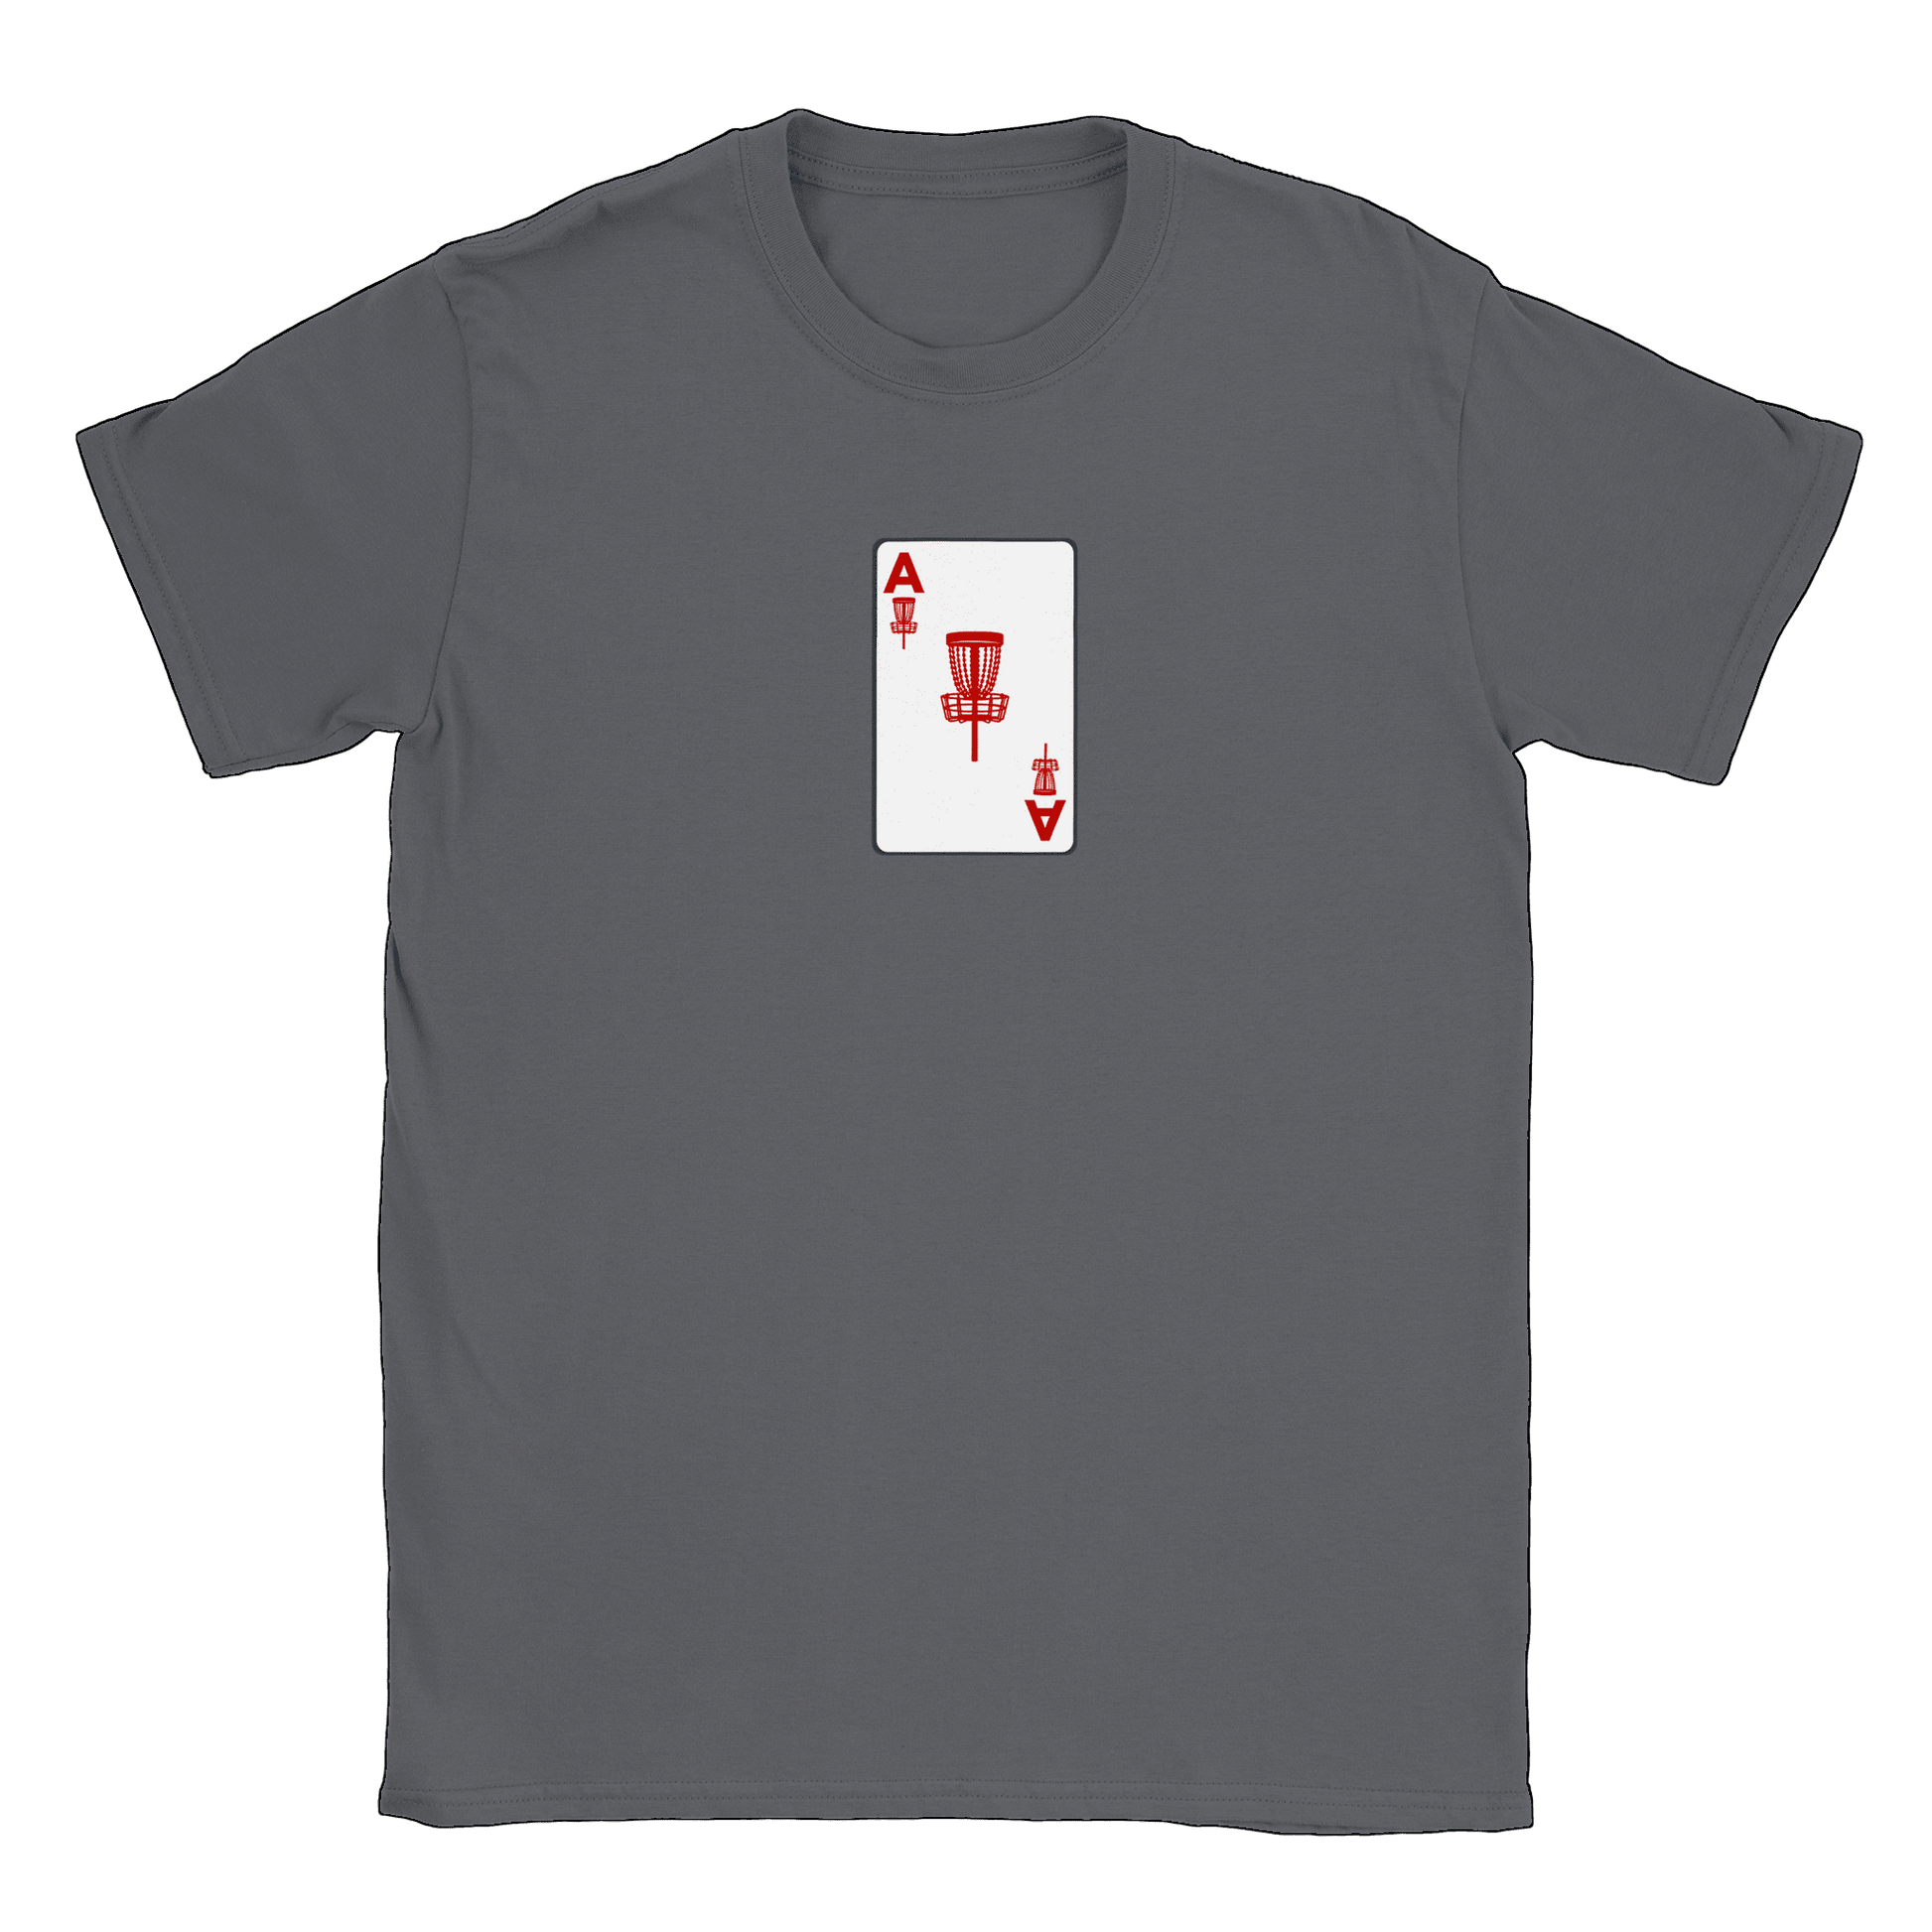 ACE Discgolf - T-shirt Charcoal